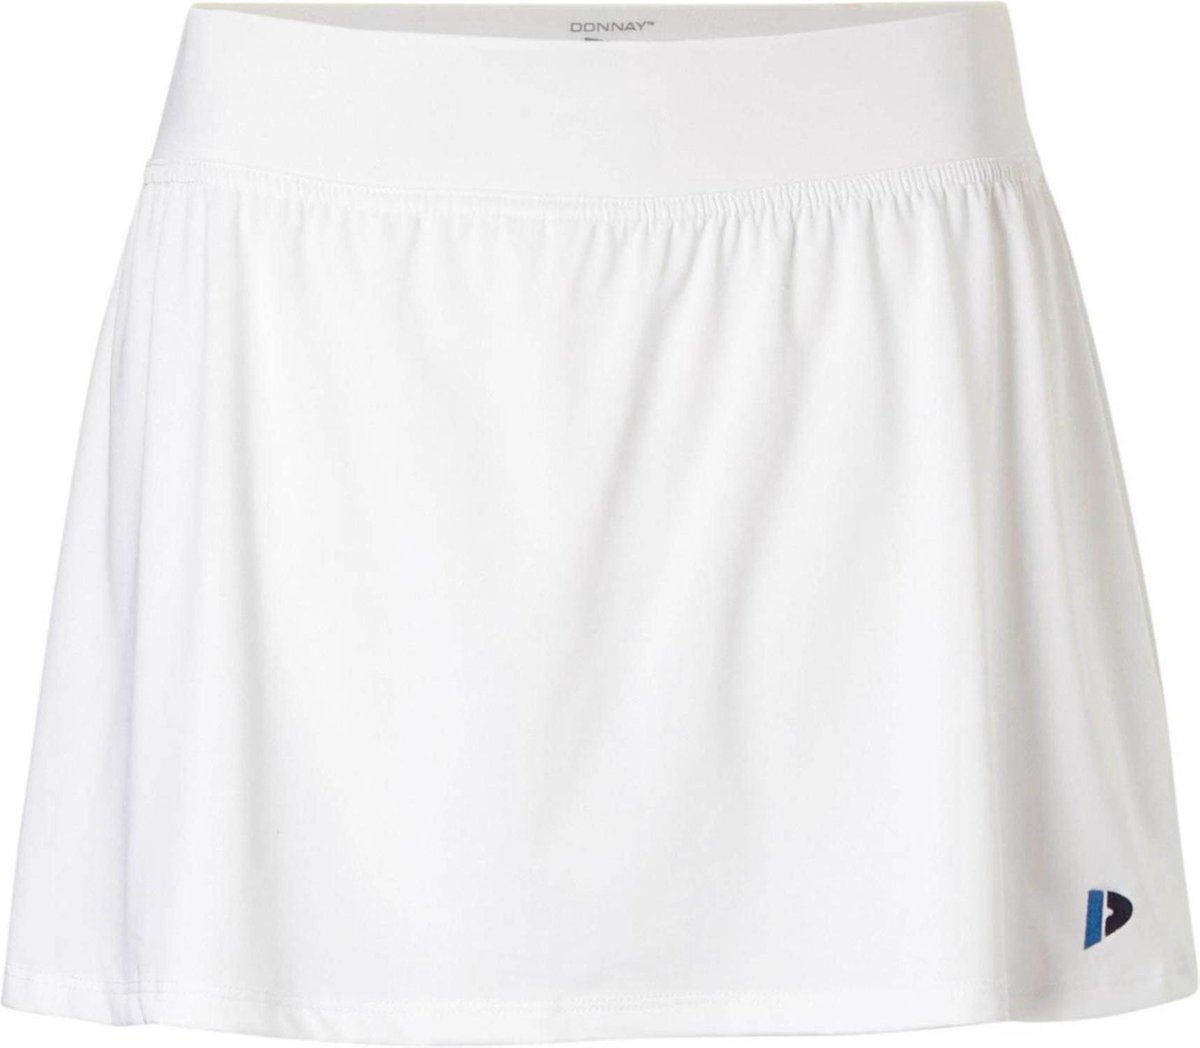 Donnay Cooldry Skirt - Sportrok - Dames - Maat XS - Wit